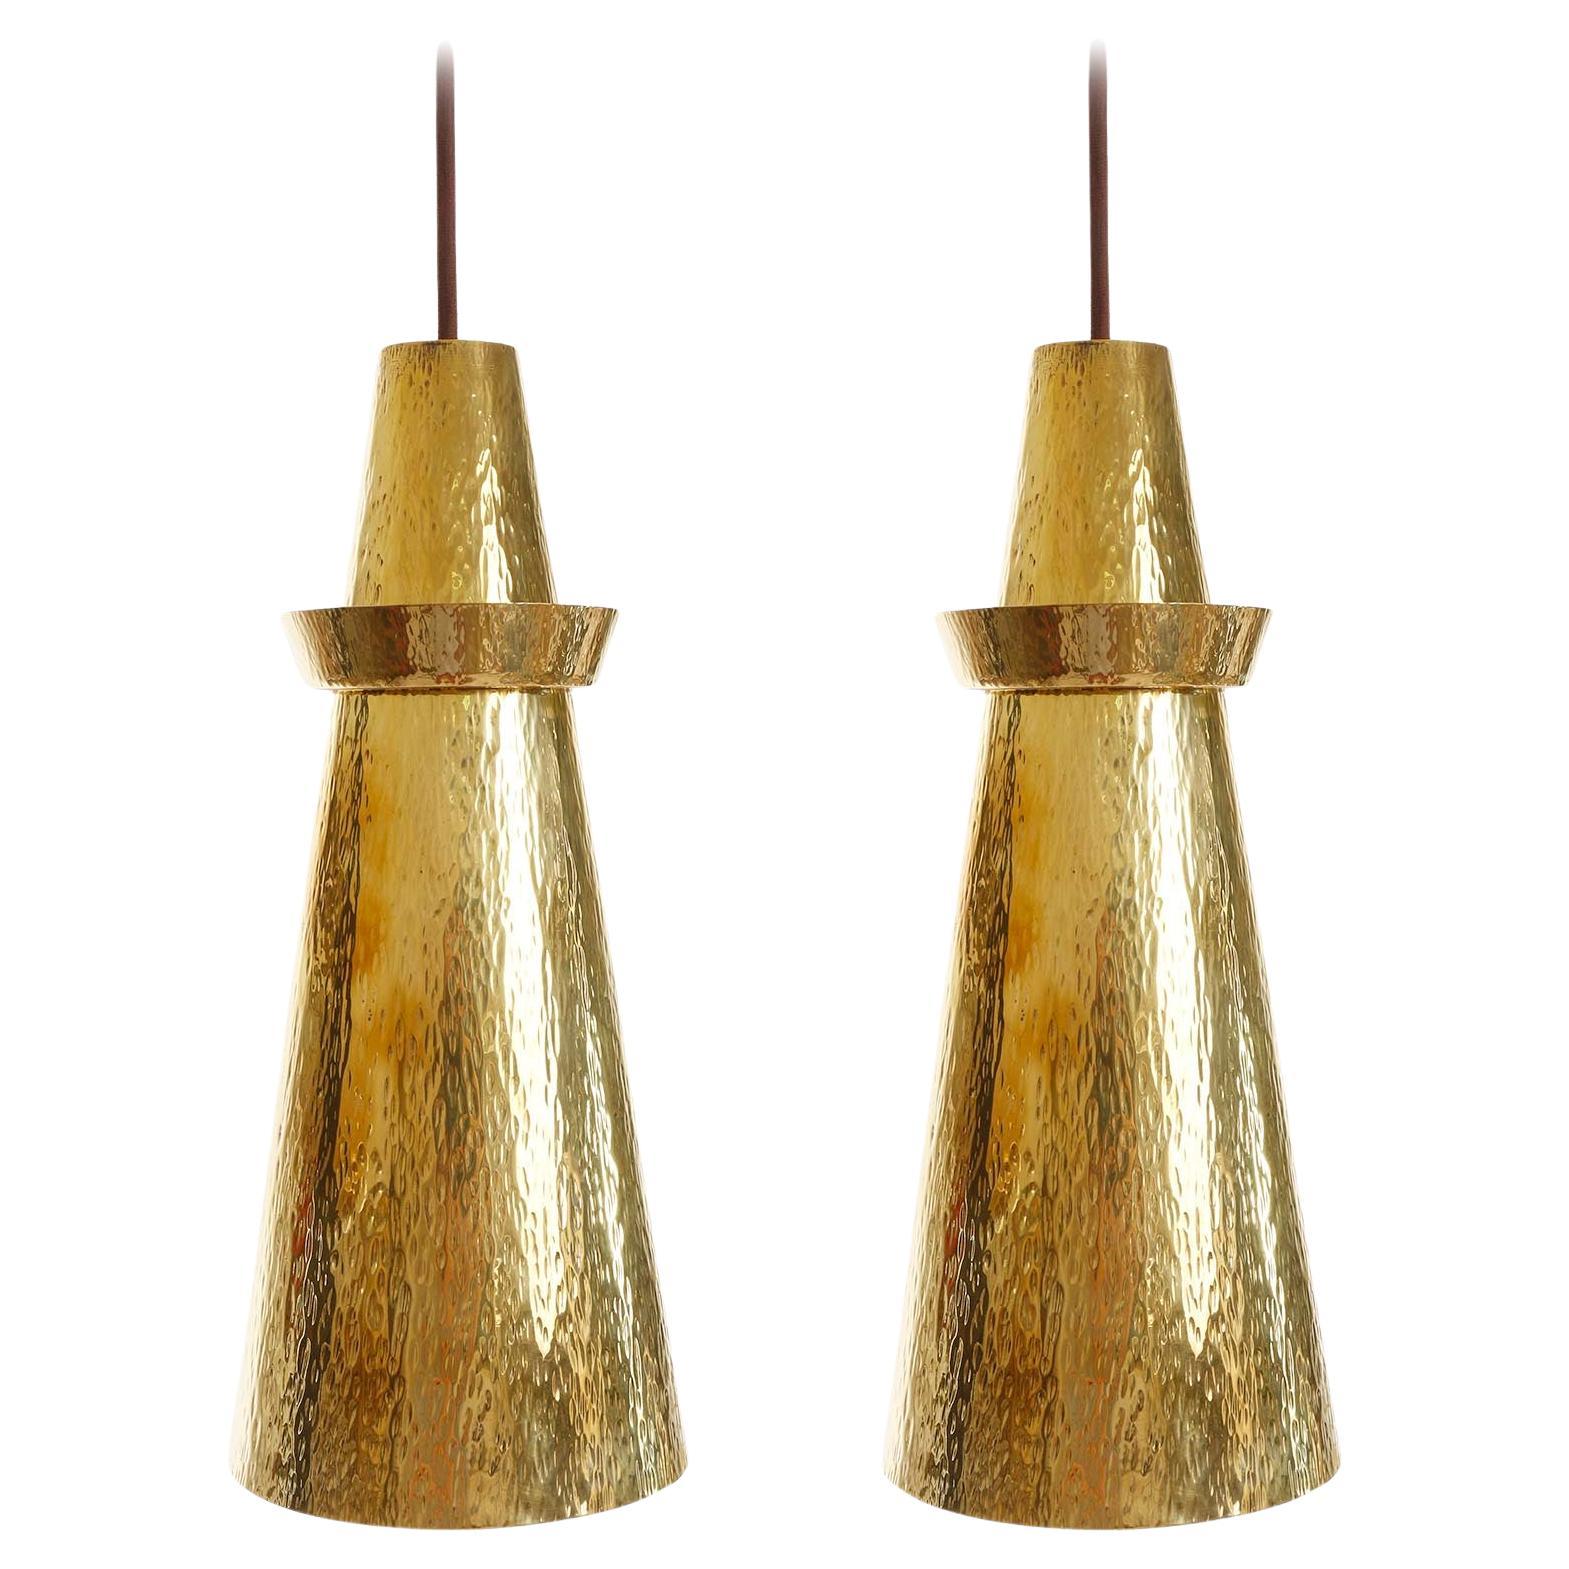 Pair of Mid-Century Modern Pendant Lights, Hammered Polished Brass, 1960s